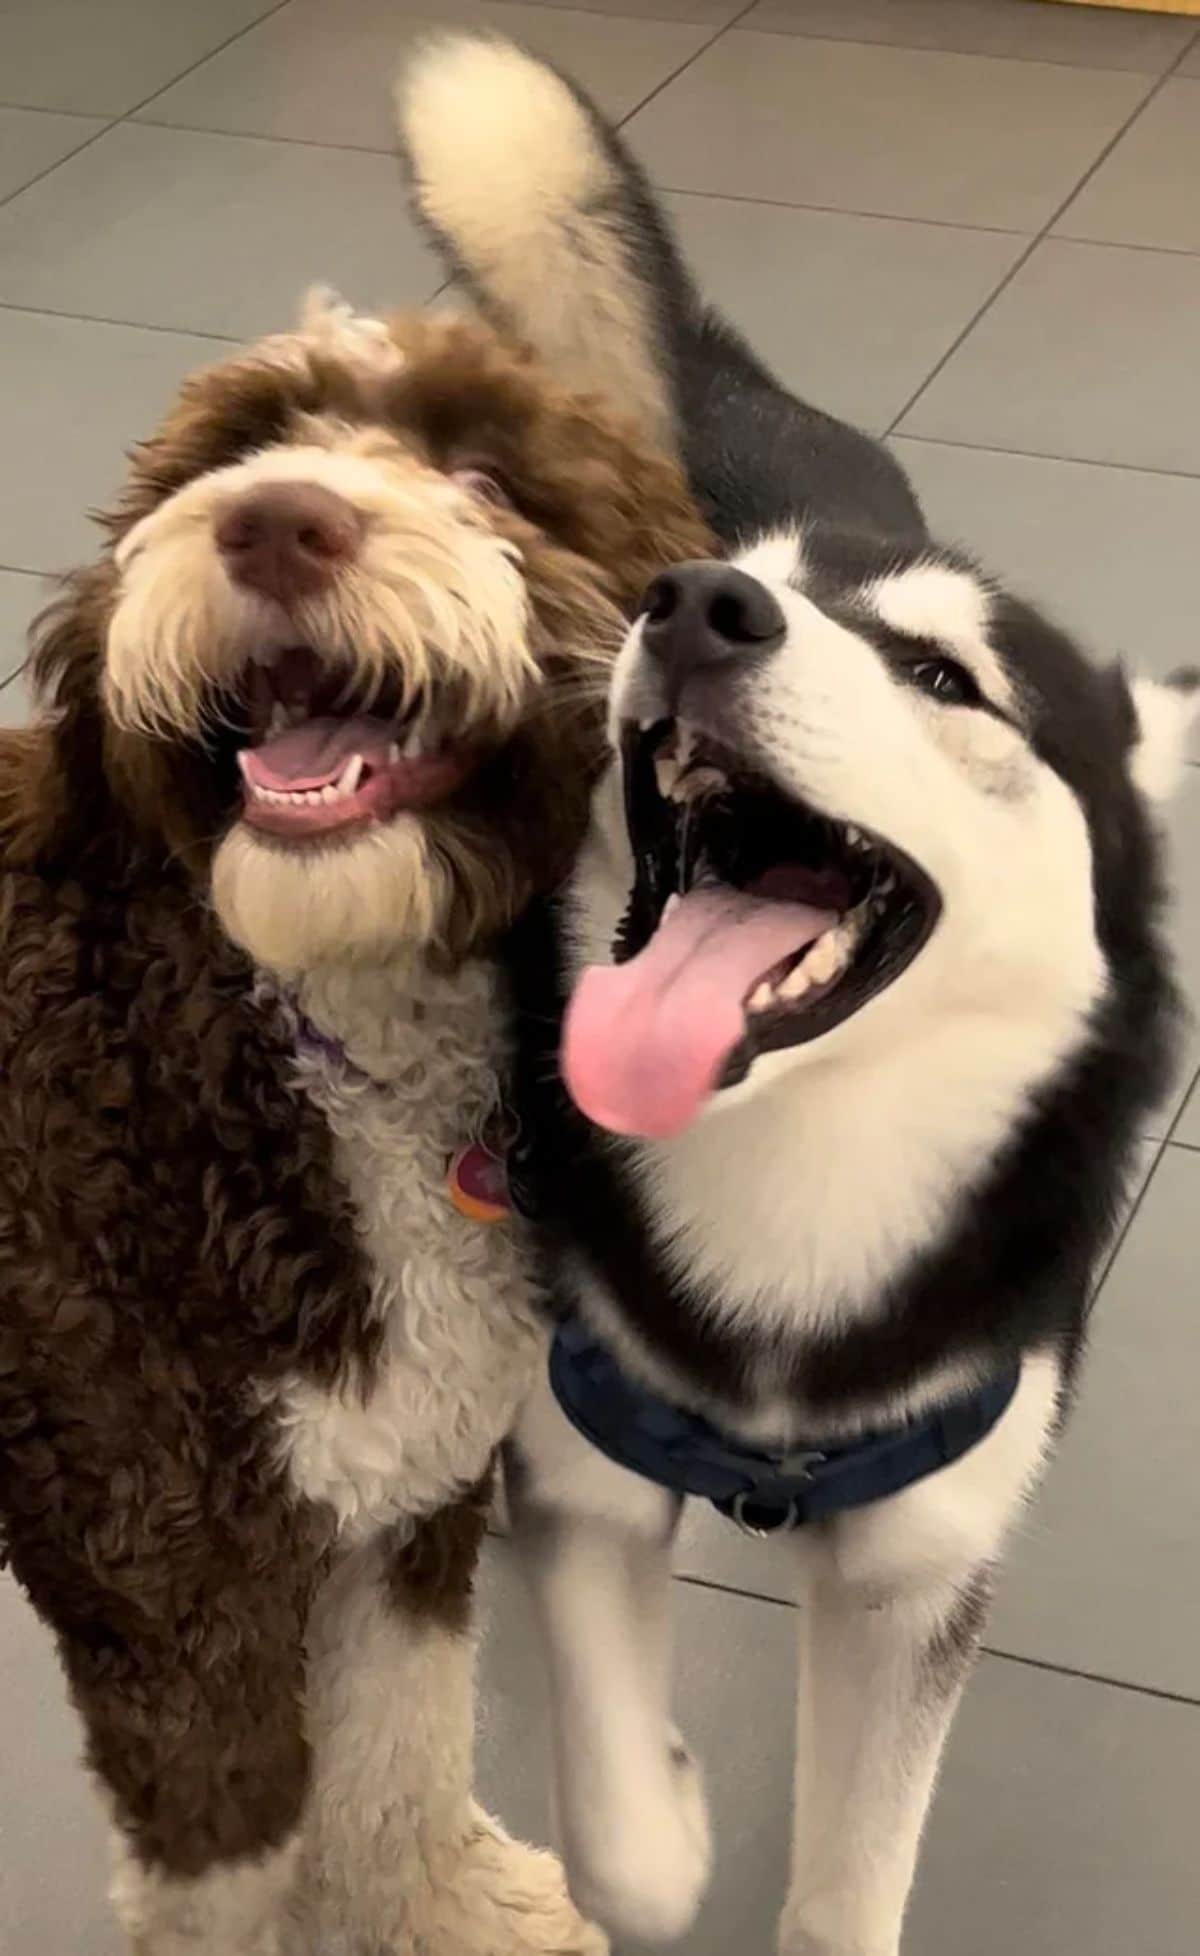 smiling fluffy brown and white dog and smiling black and white husky